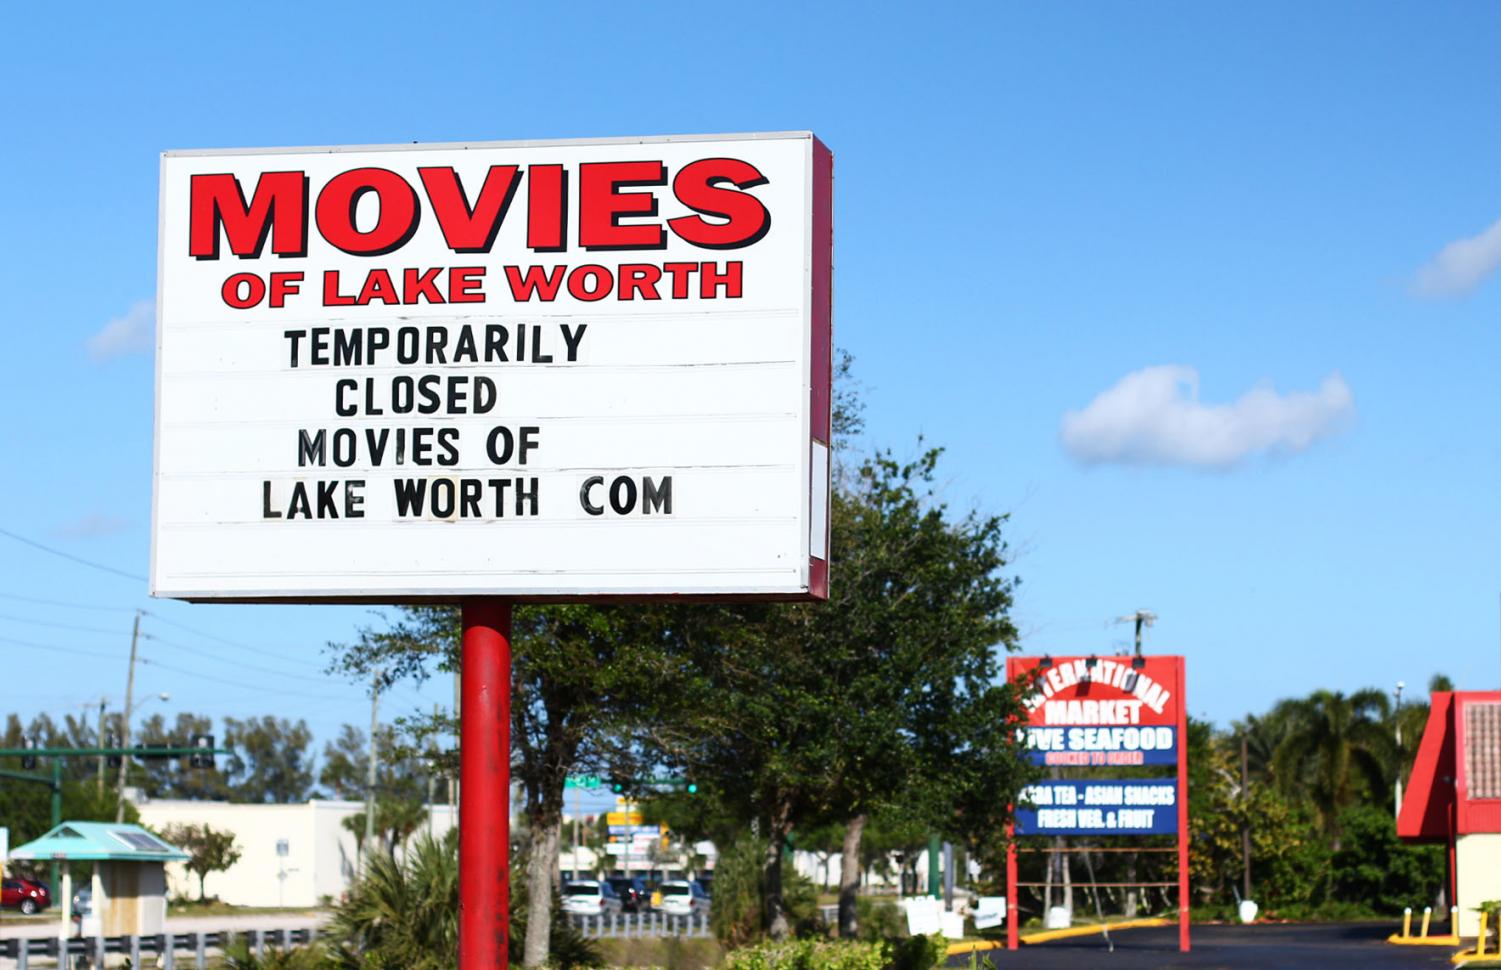 Empty movie theaters force filmmakers to reconsider what it means to screen a film.